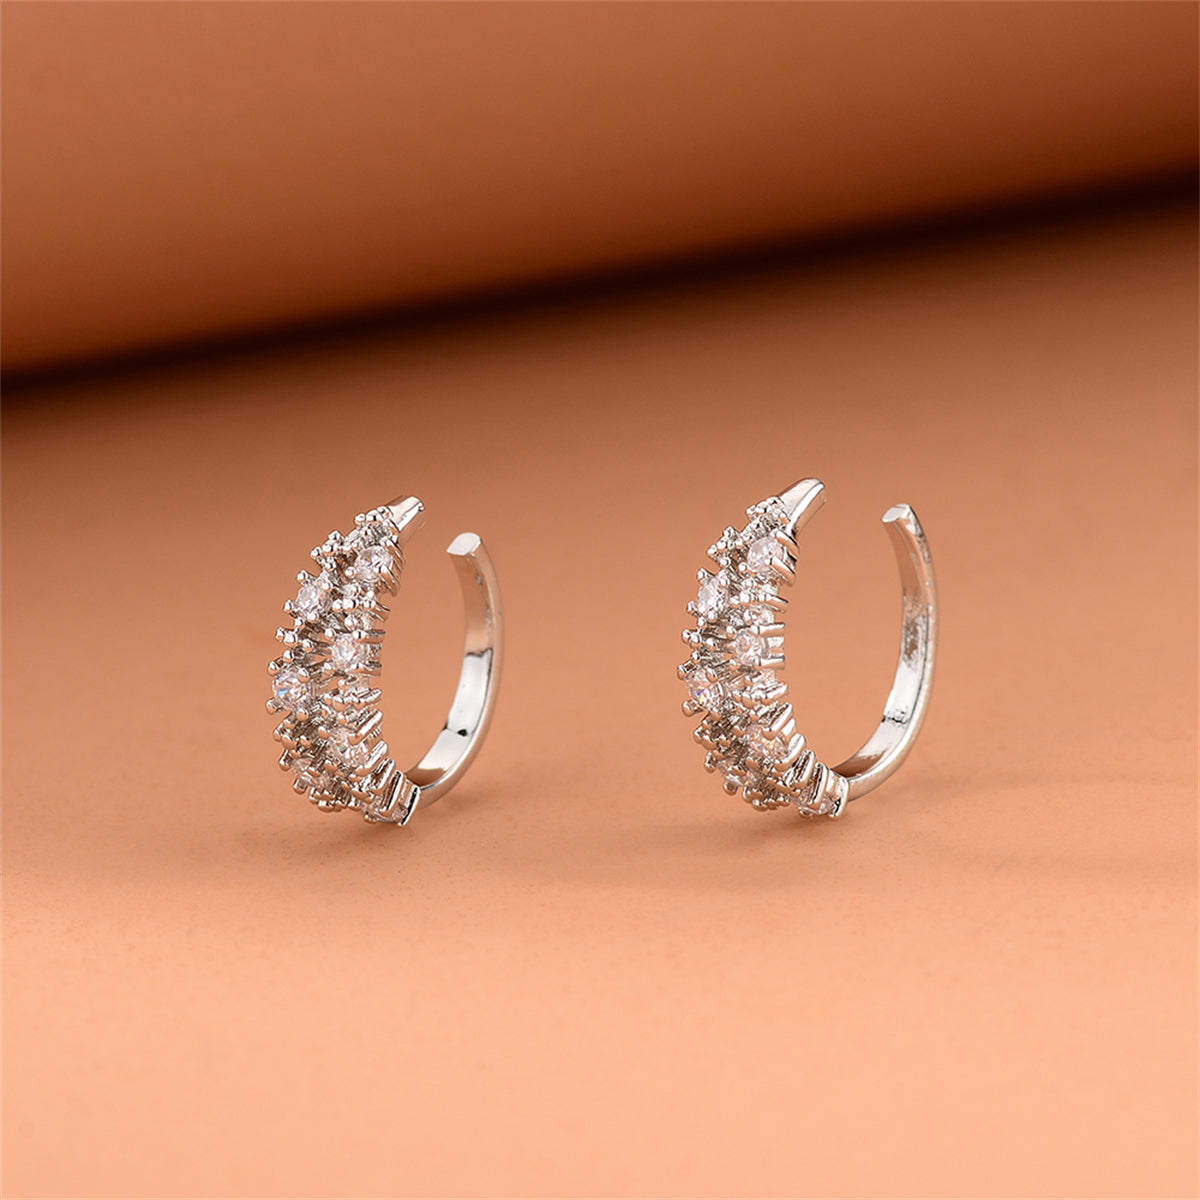 Cubic Zirconia & Silver-Plated Textured Ear Cuffs